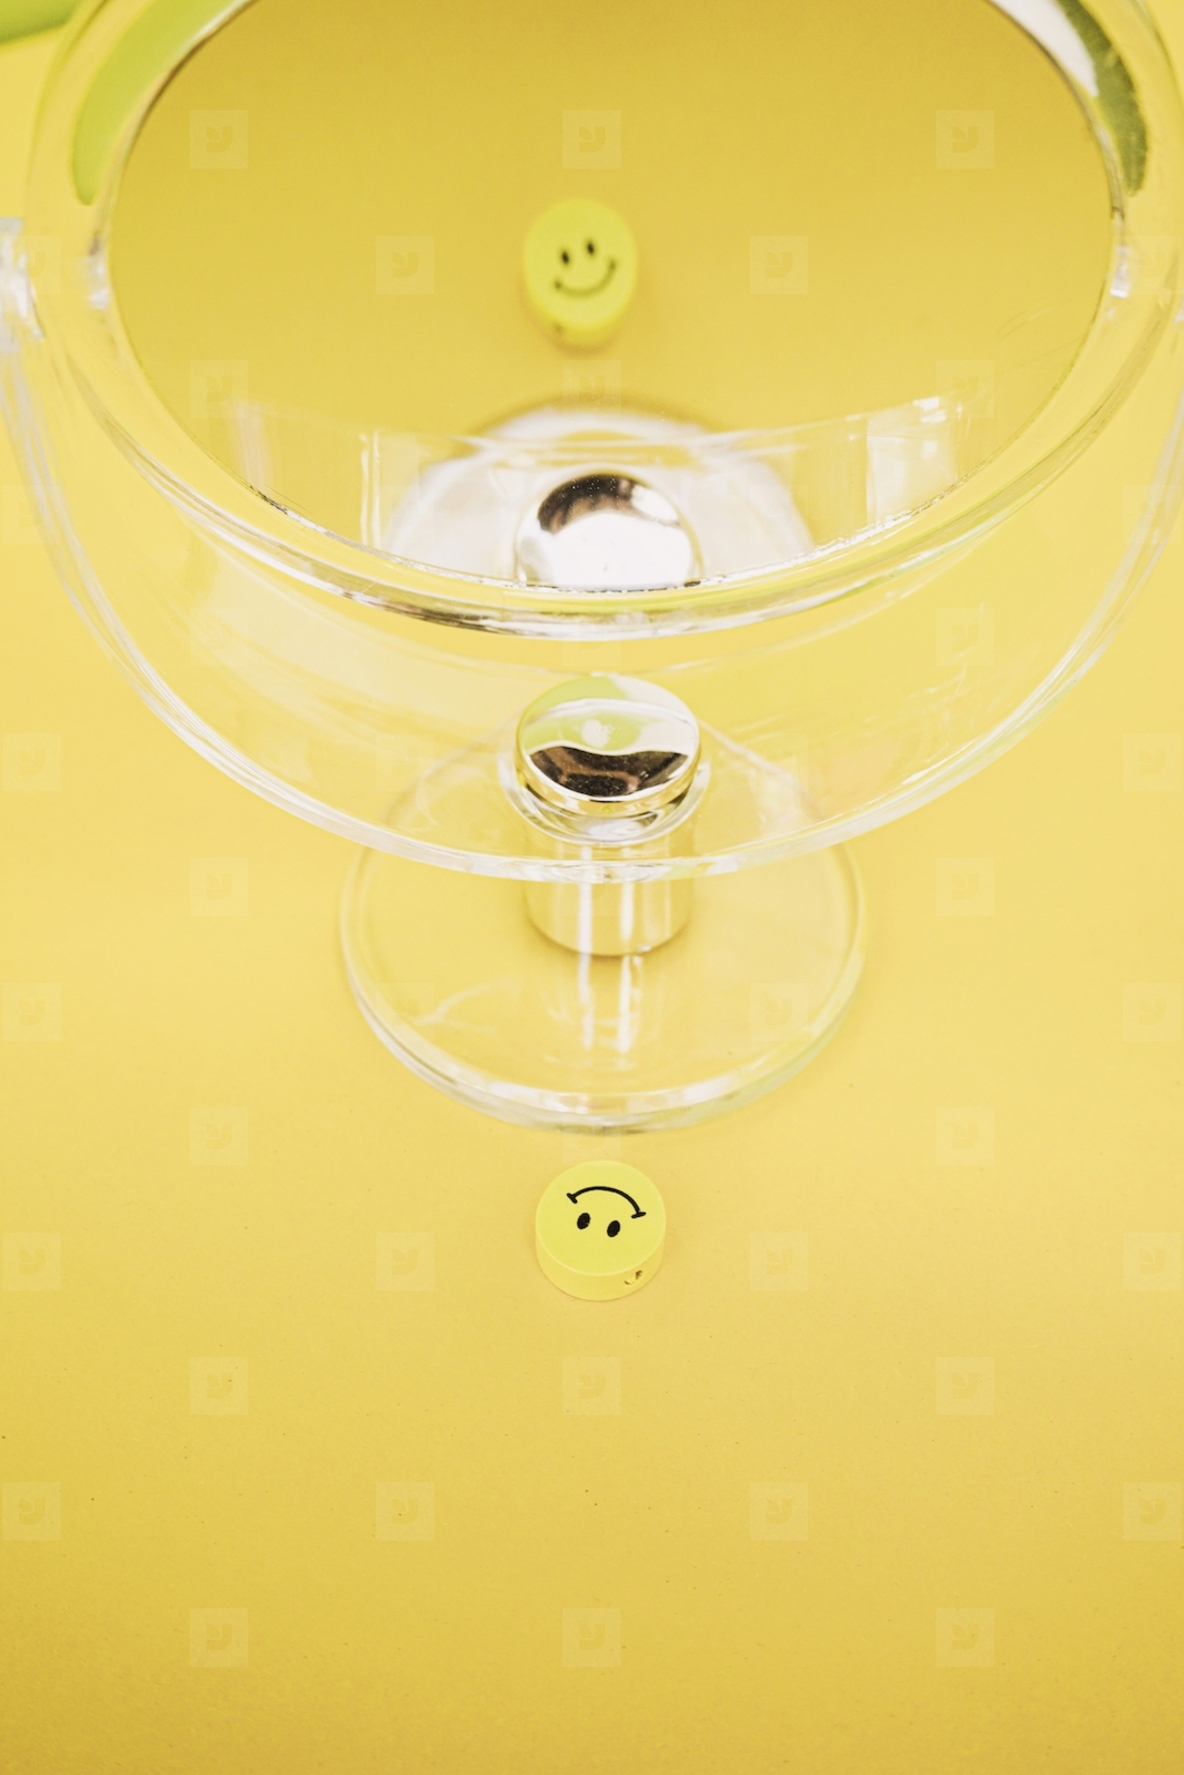 Conceptual image of happiness and wellness in yellow color